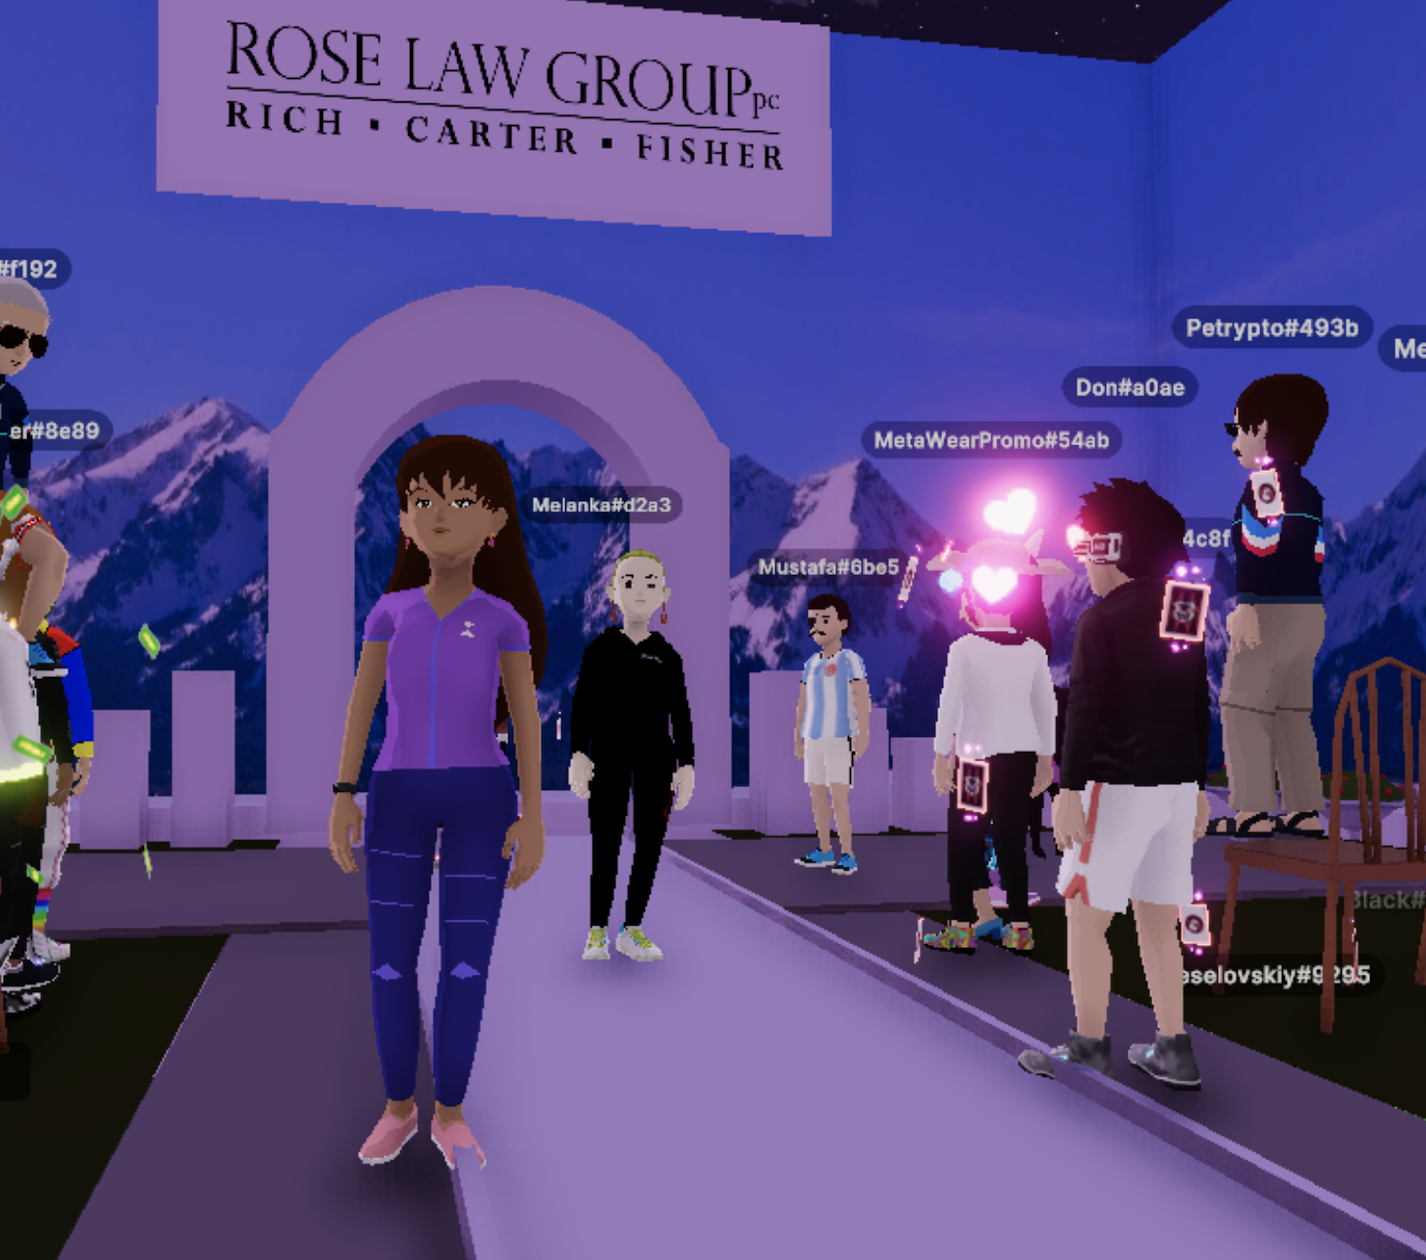 Rose Law Group Implements First Metaverse Marriage Rose Law Group Reporter